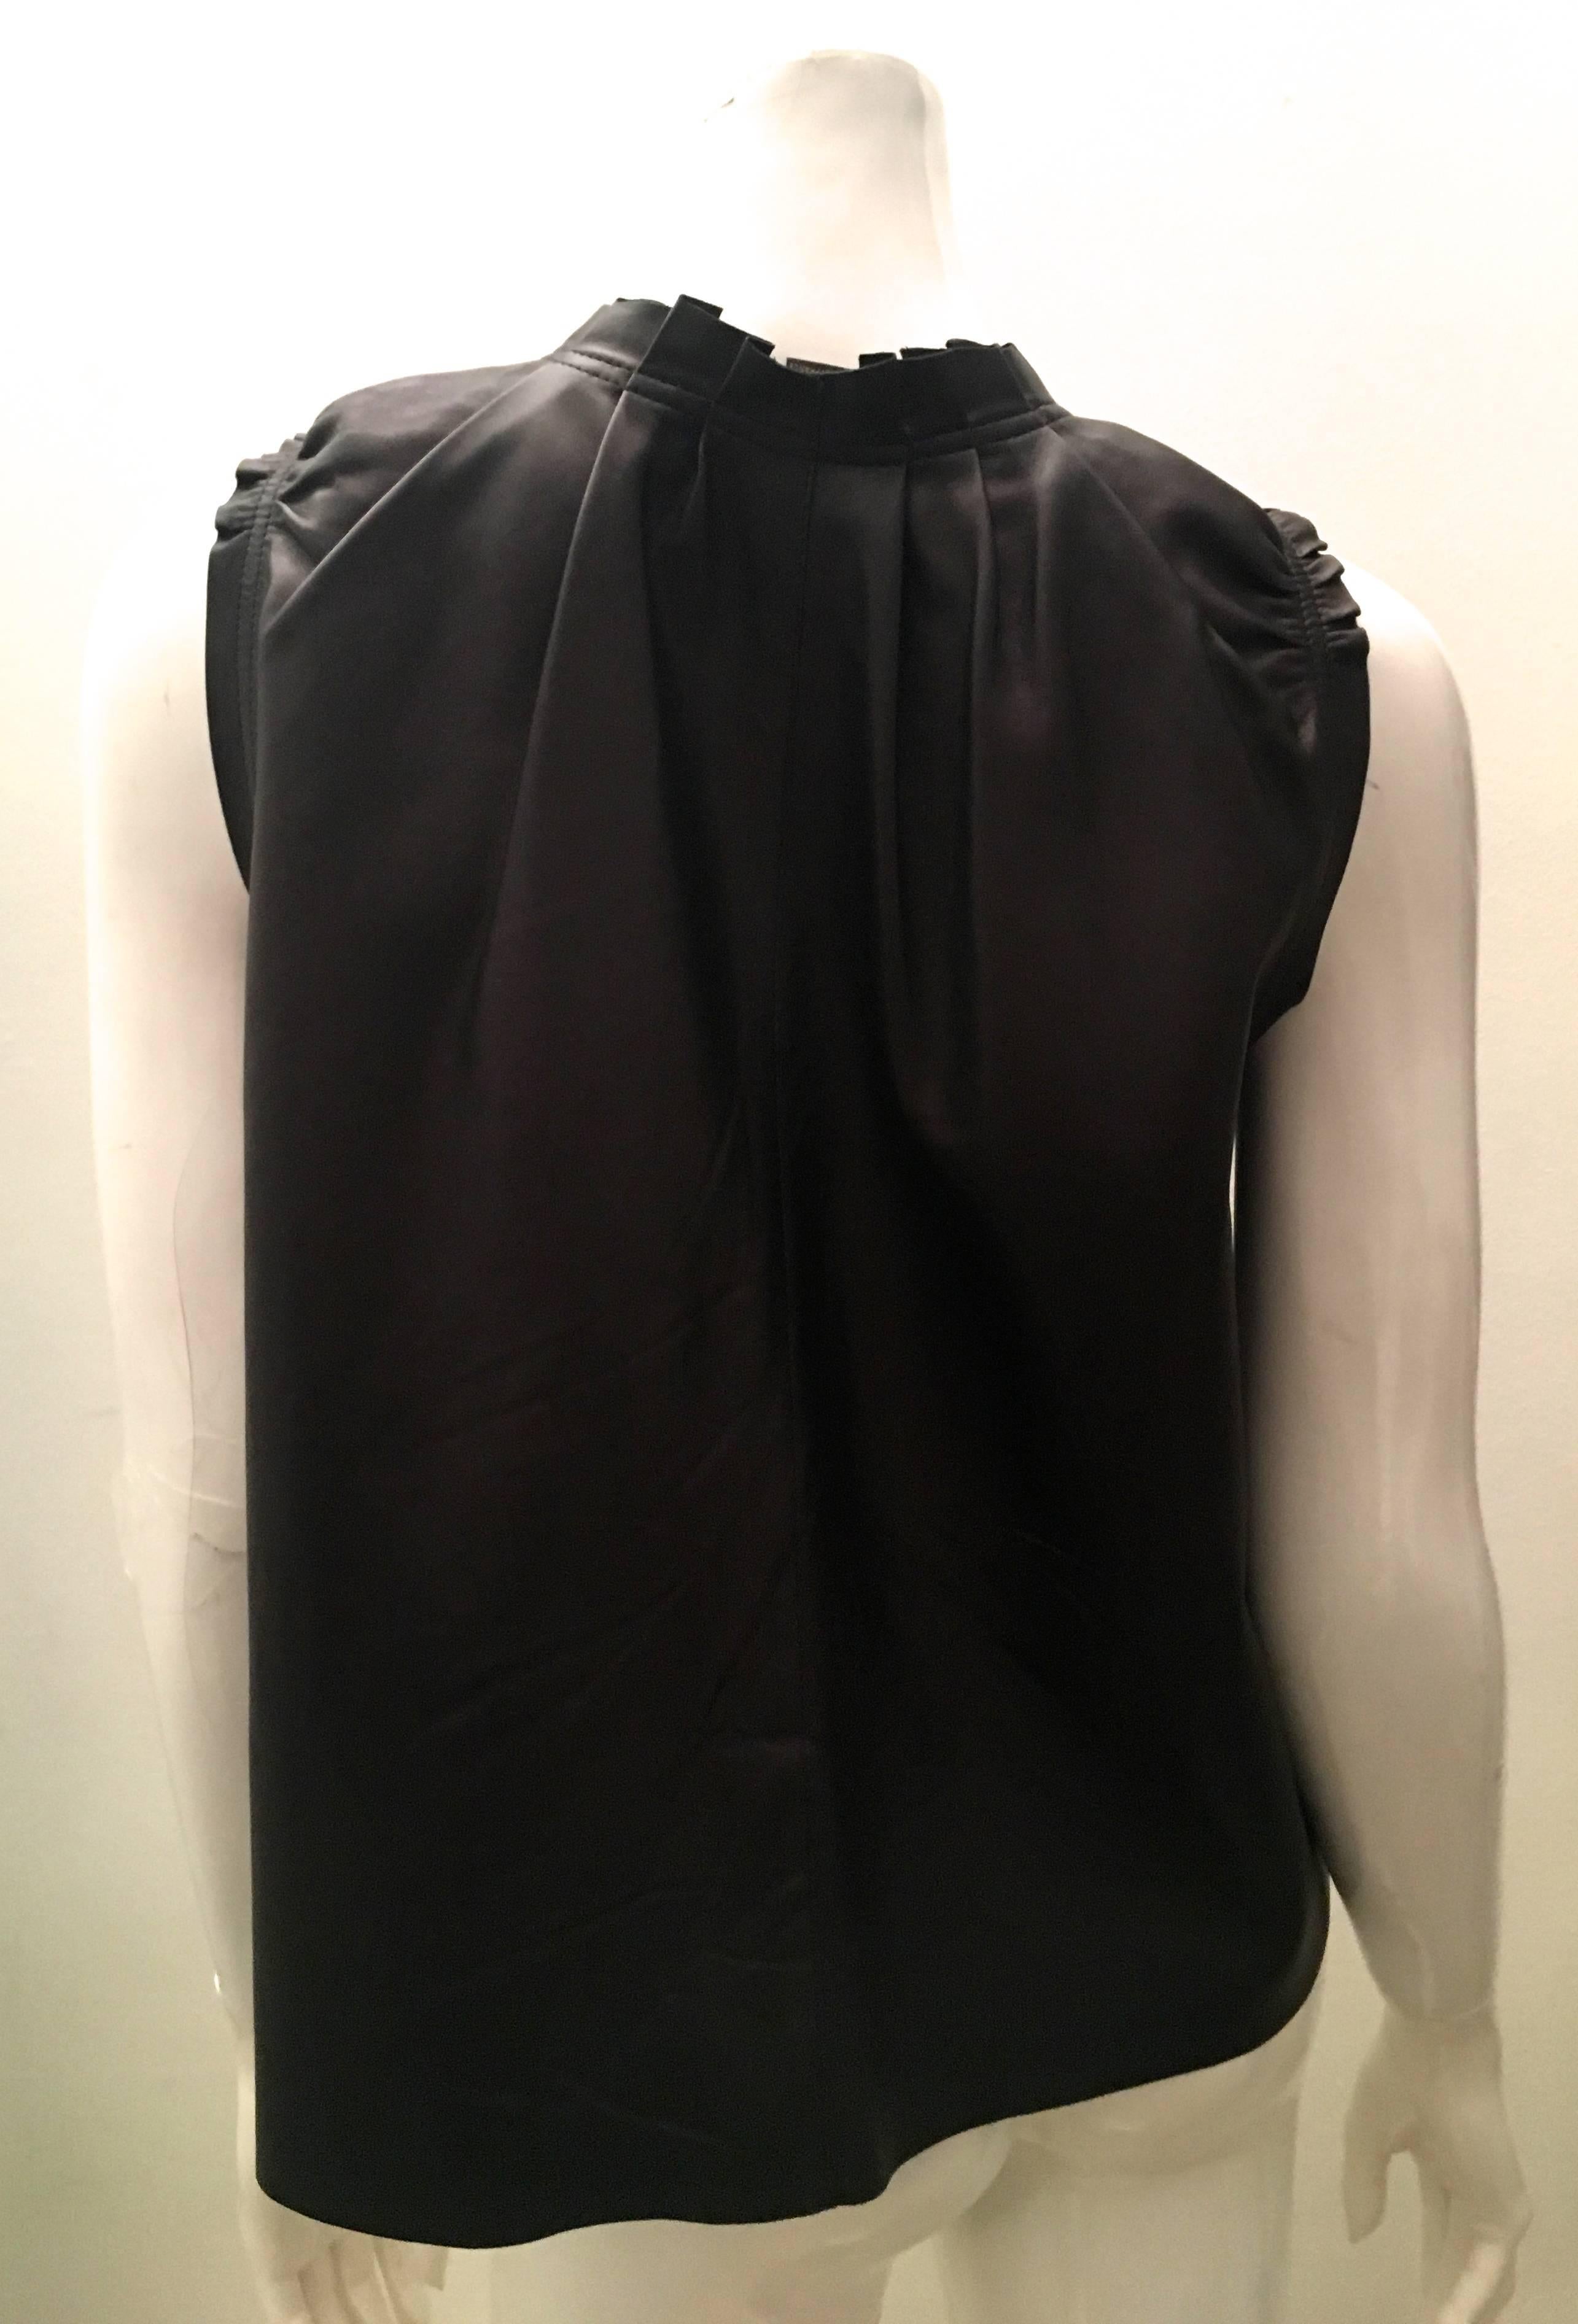 New Louis Vuitton Vest - 100% Leather - Dark Brown In Excellent Condition For Sale In Boca Raton, FL